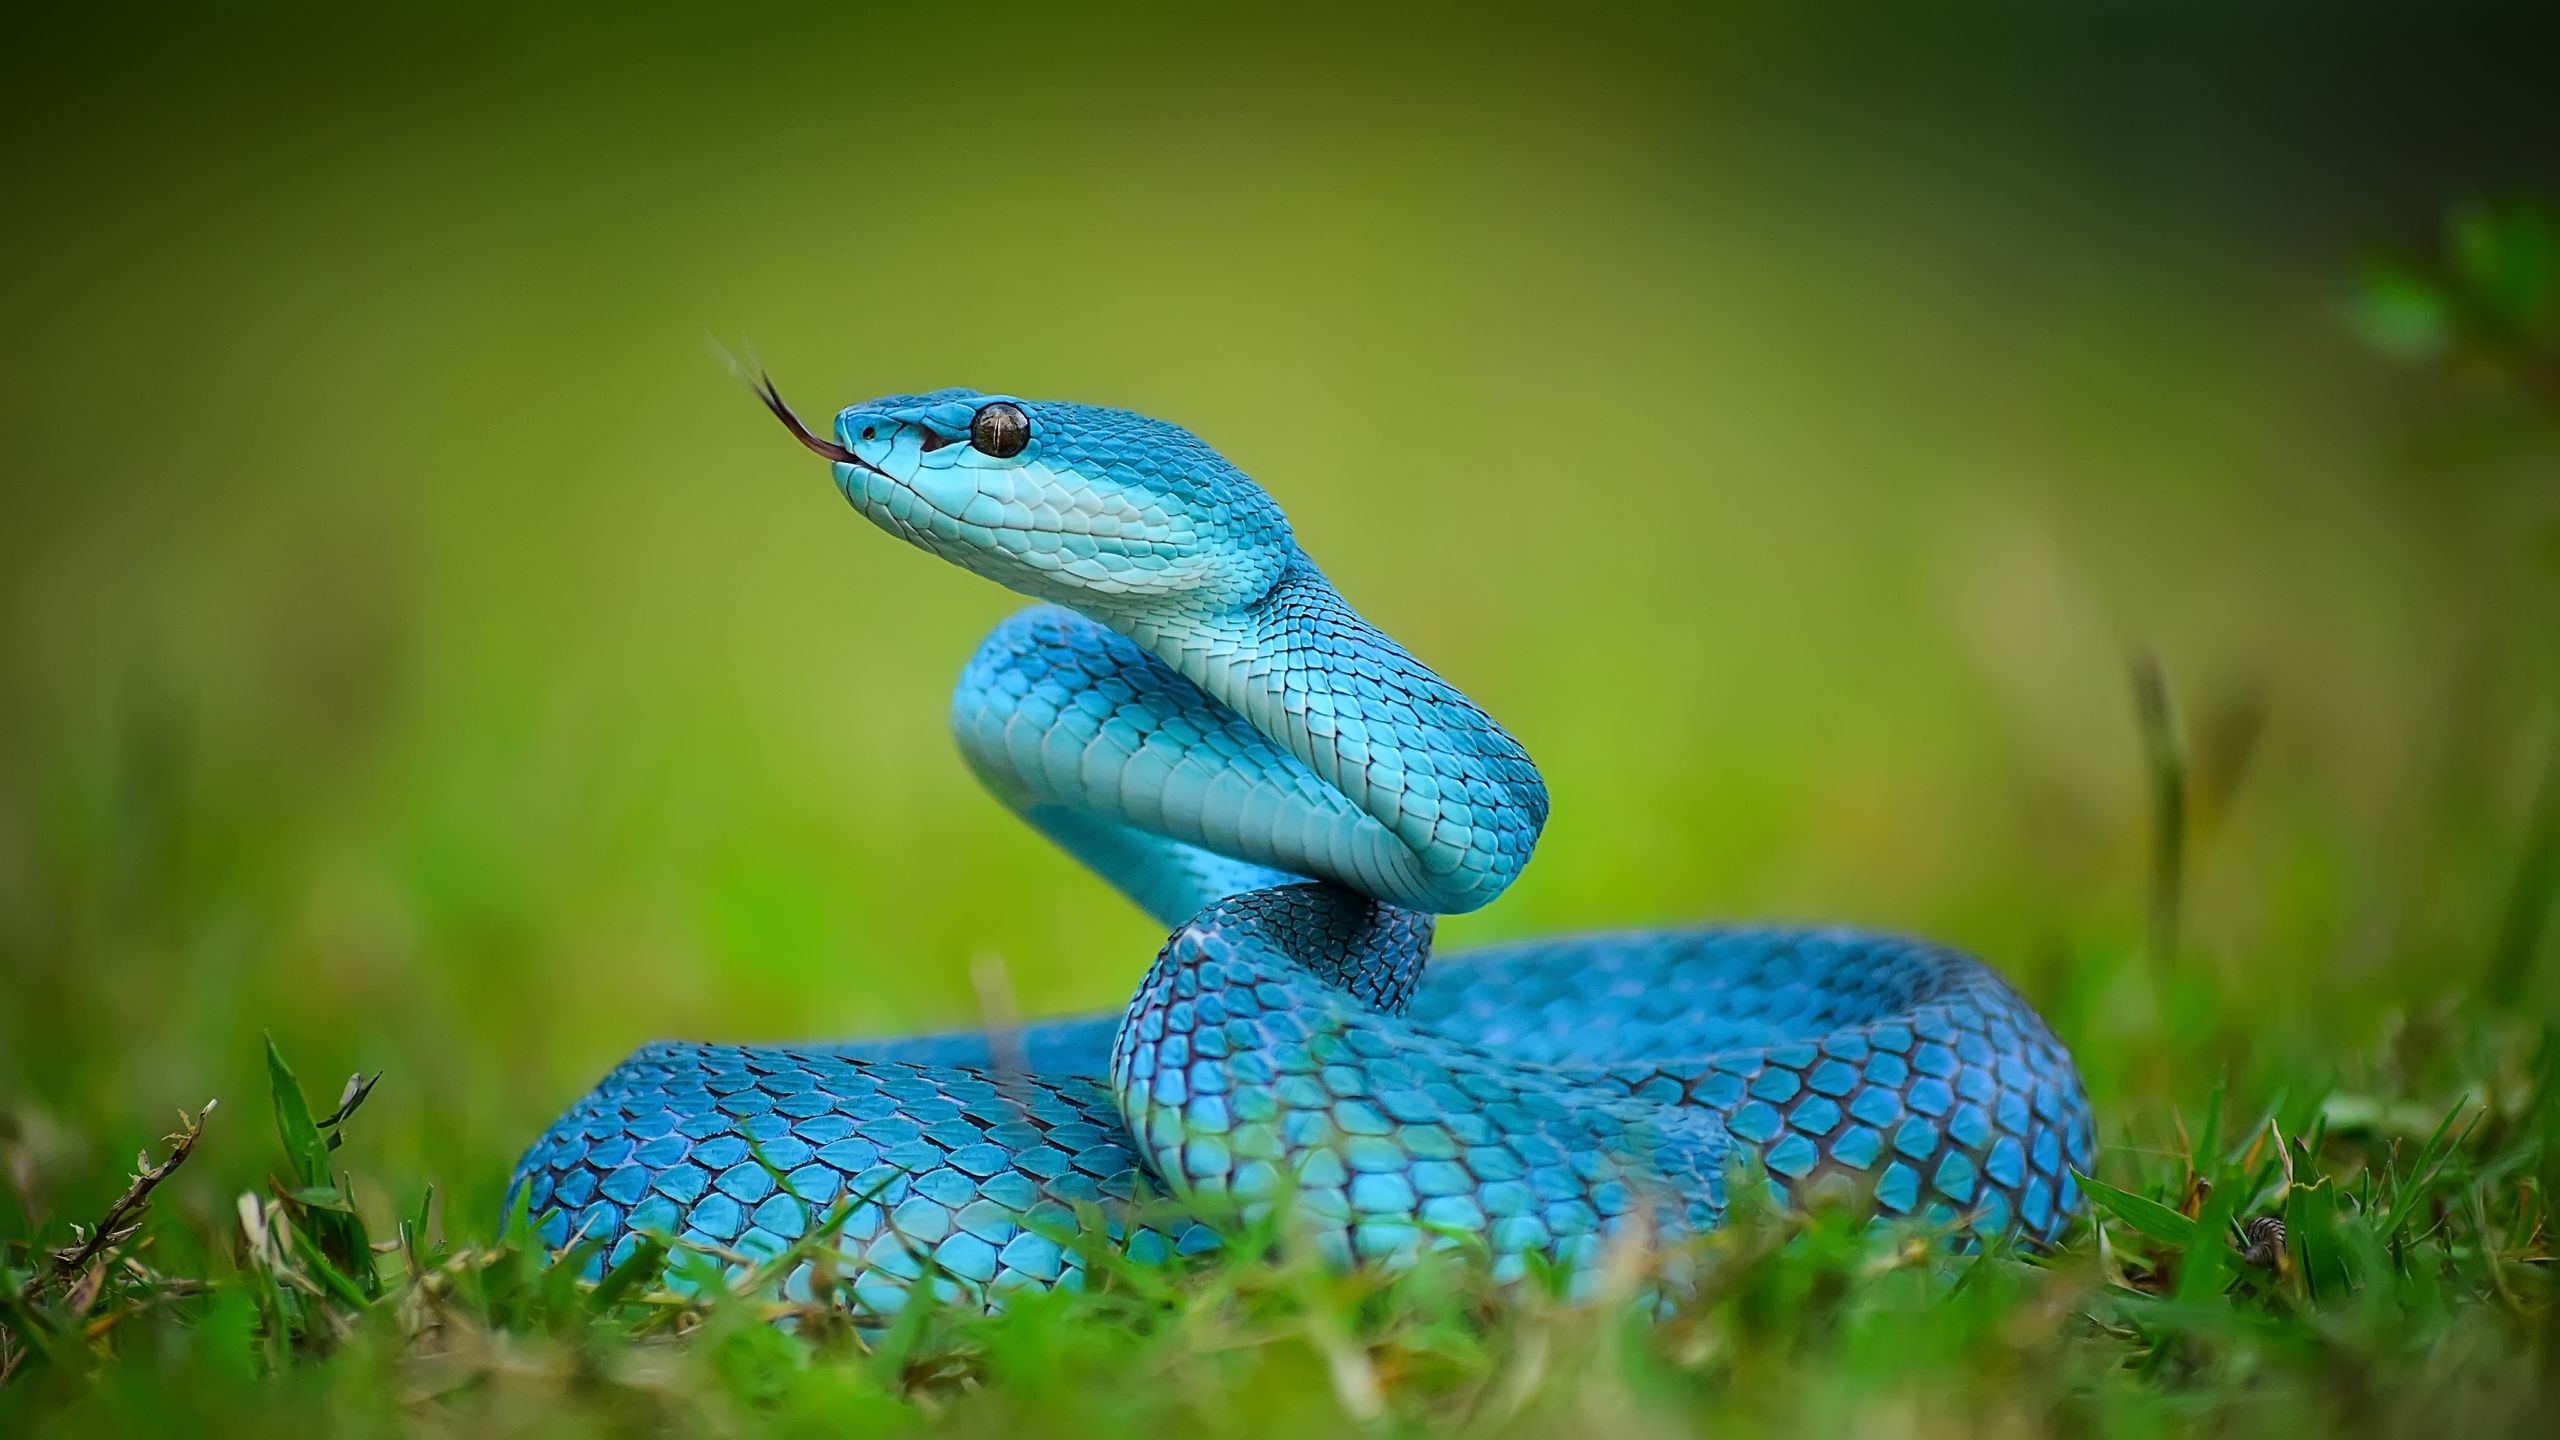 There are approximately 3,000 species of snakes in the world